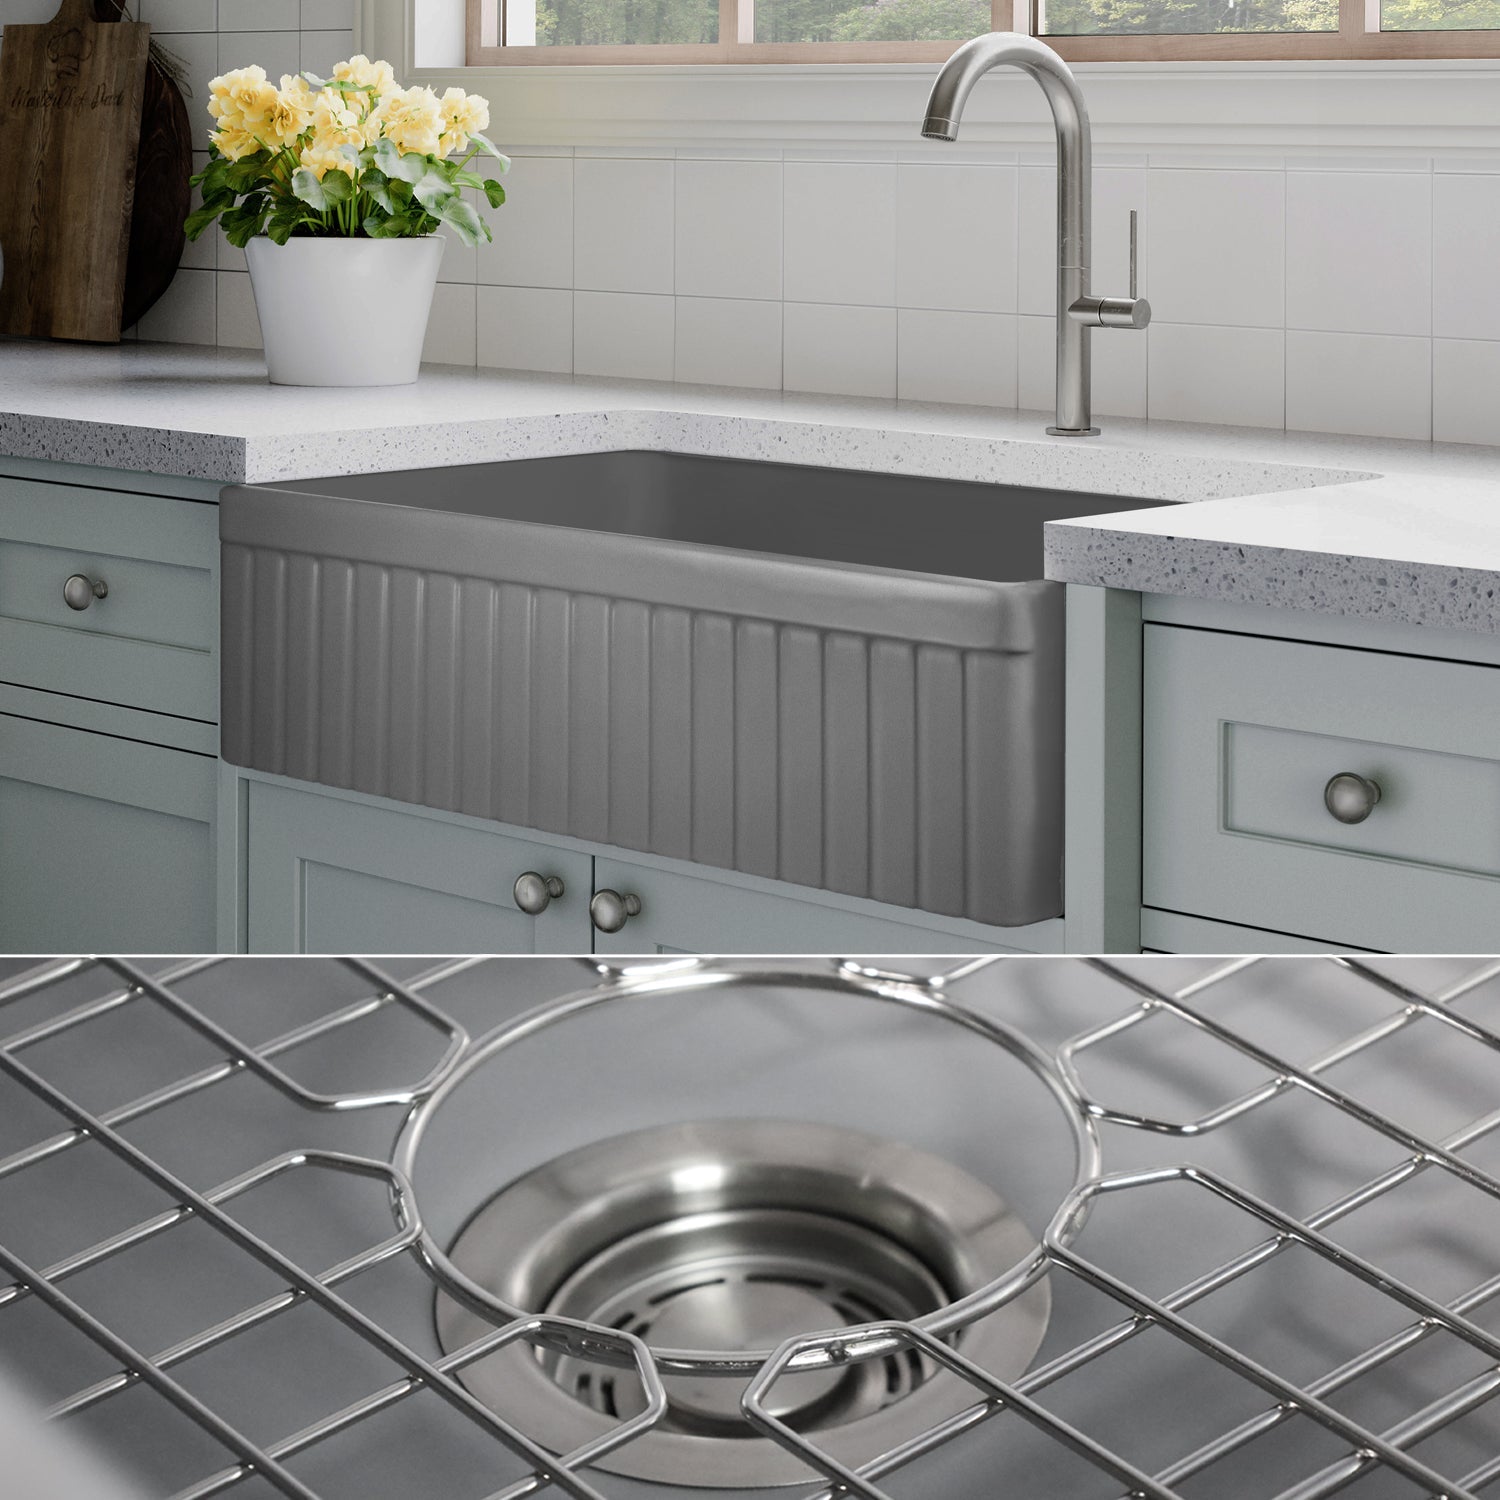 FSW1047 LUX 33-INCH SOLID FIRECLAY FARMHOUSE SINK, MATTE GRAY, STAINLESS STEEL ACCS, FLUTED FRONT